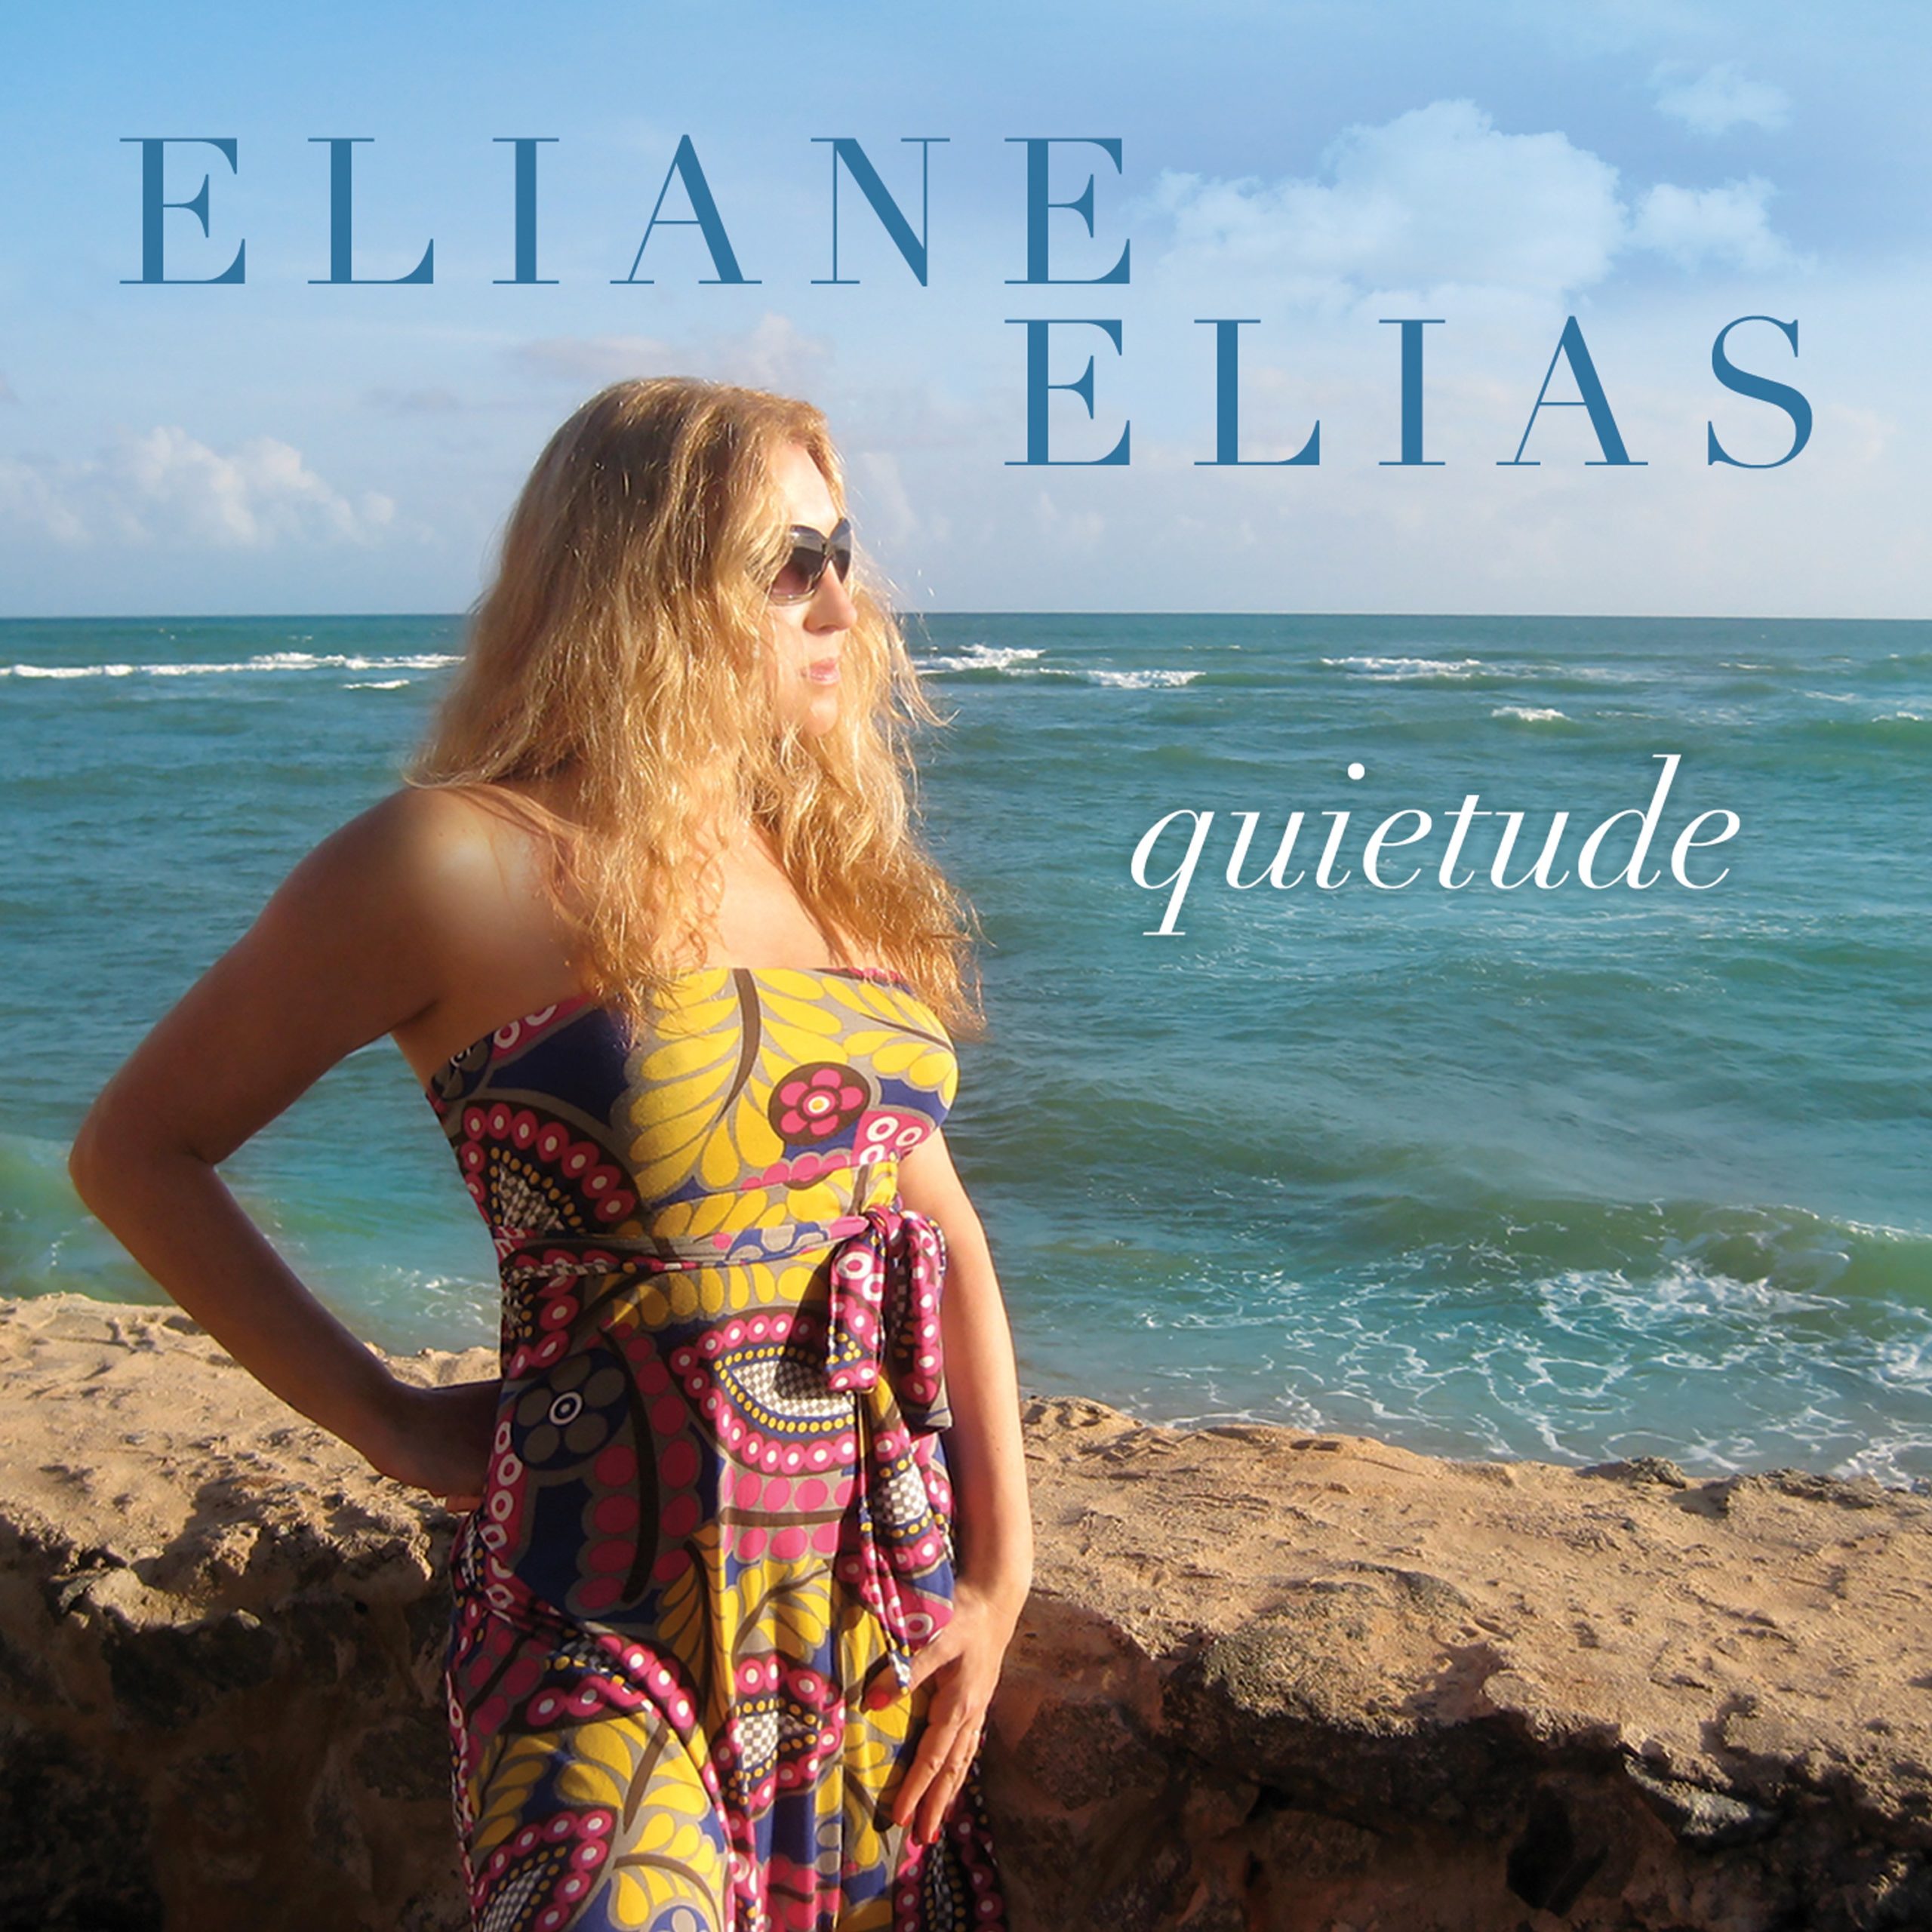 Quietude” brings Eliane her second nomination for the LIBERA Award for Best Latin Jazz Record of the Year 